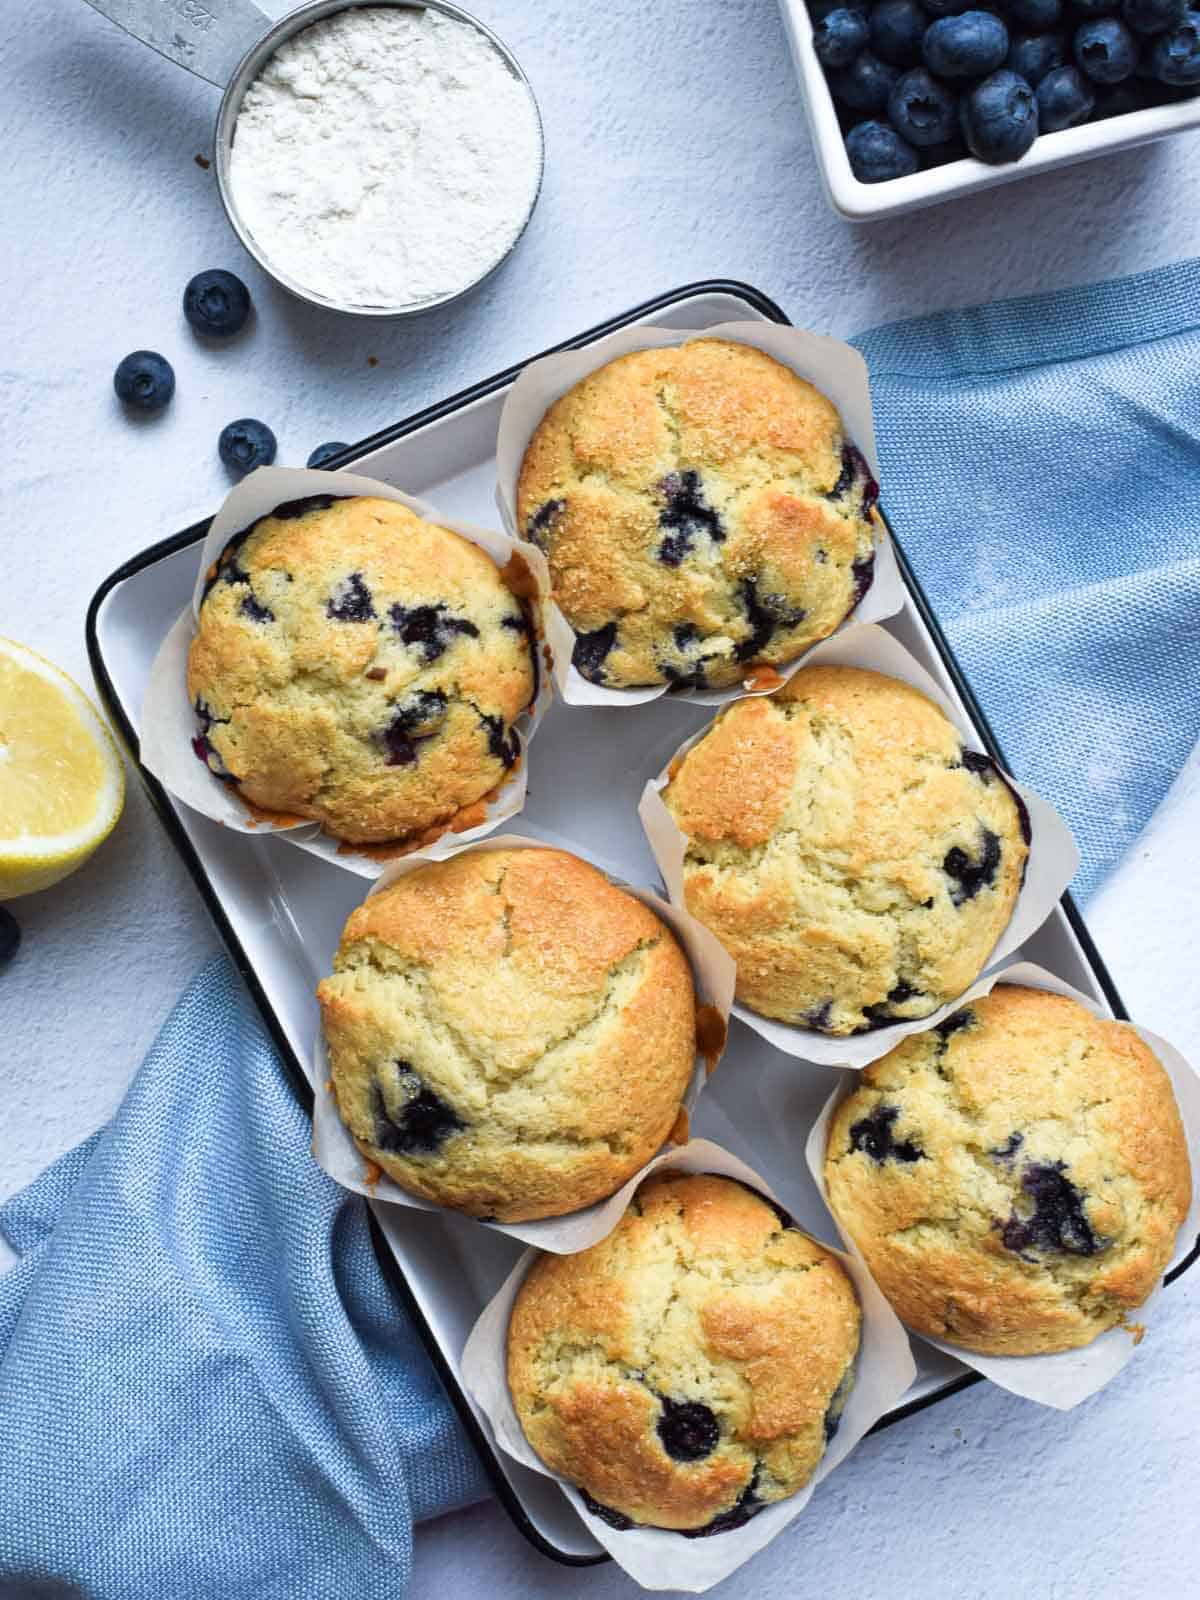 Overview image of blueberry lemons muffins on a white background with blueberries scattered next to a blue napkin.